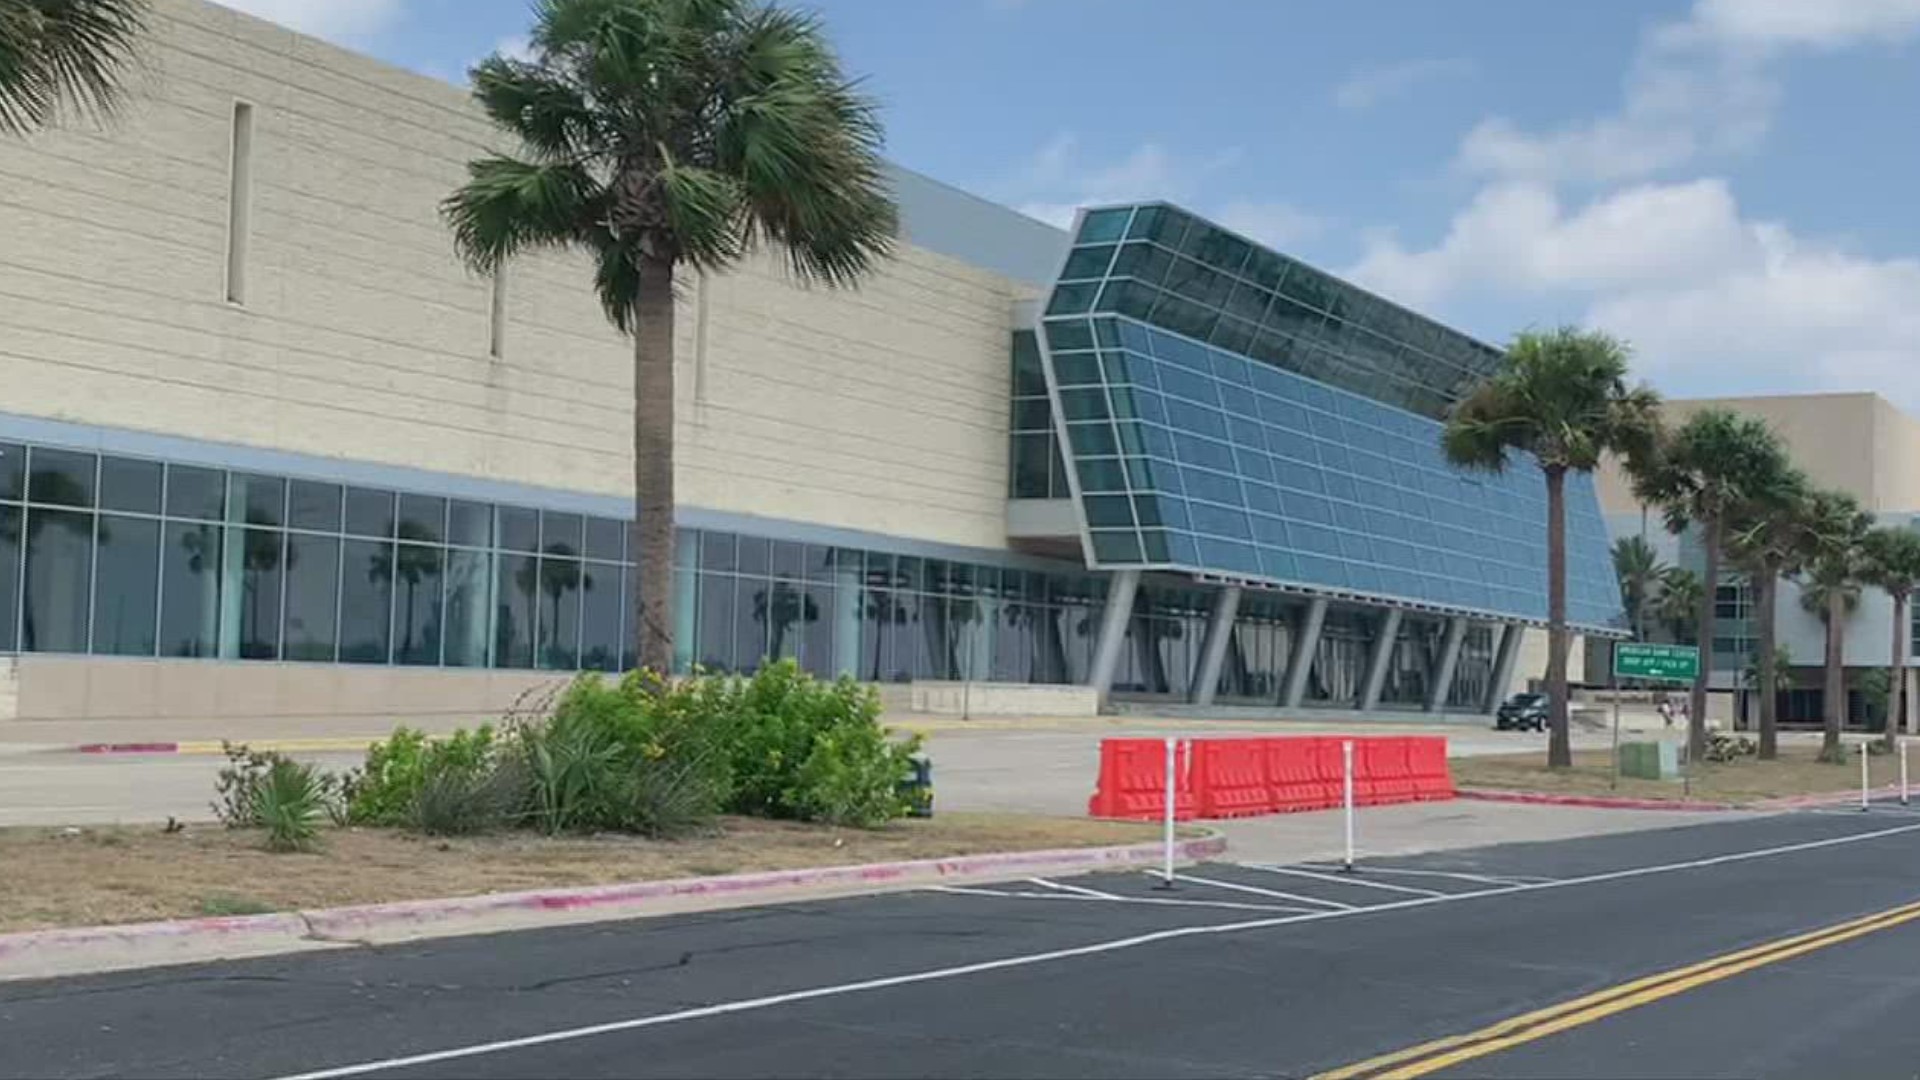 City officials are awaiting the results of a study to build a hotel/convention facility connected to the American Bank Center.